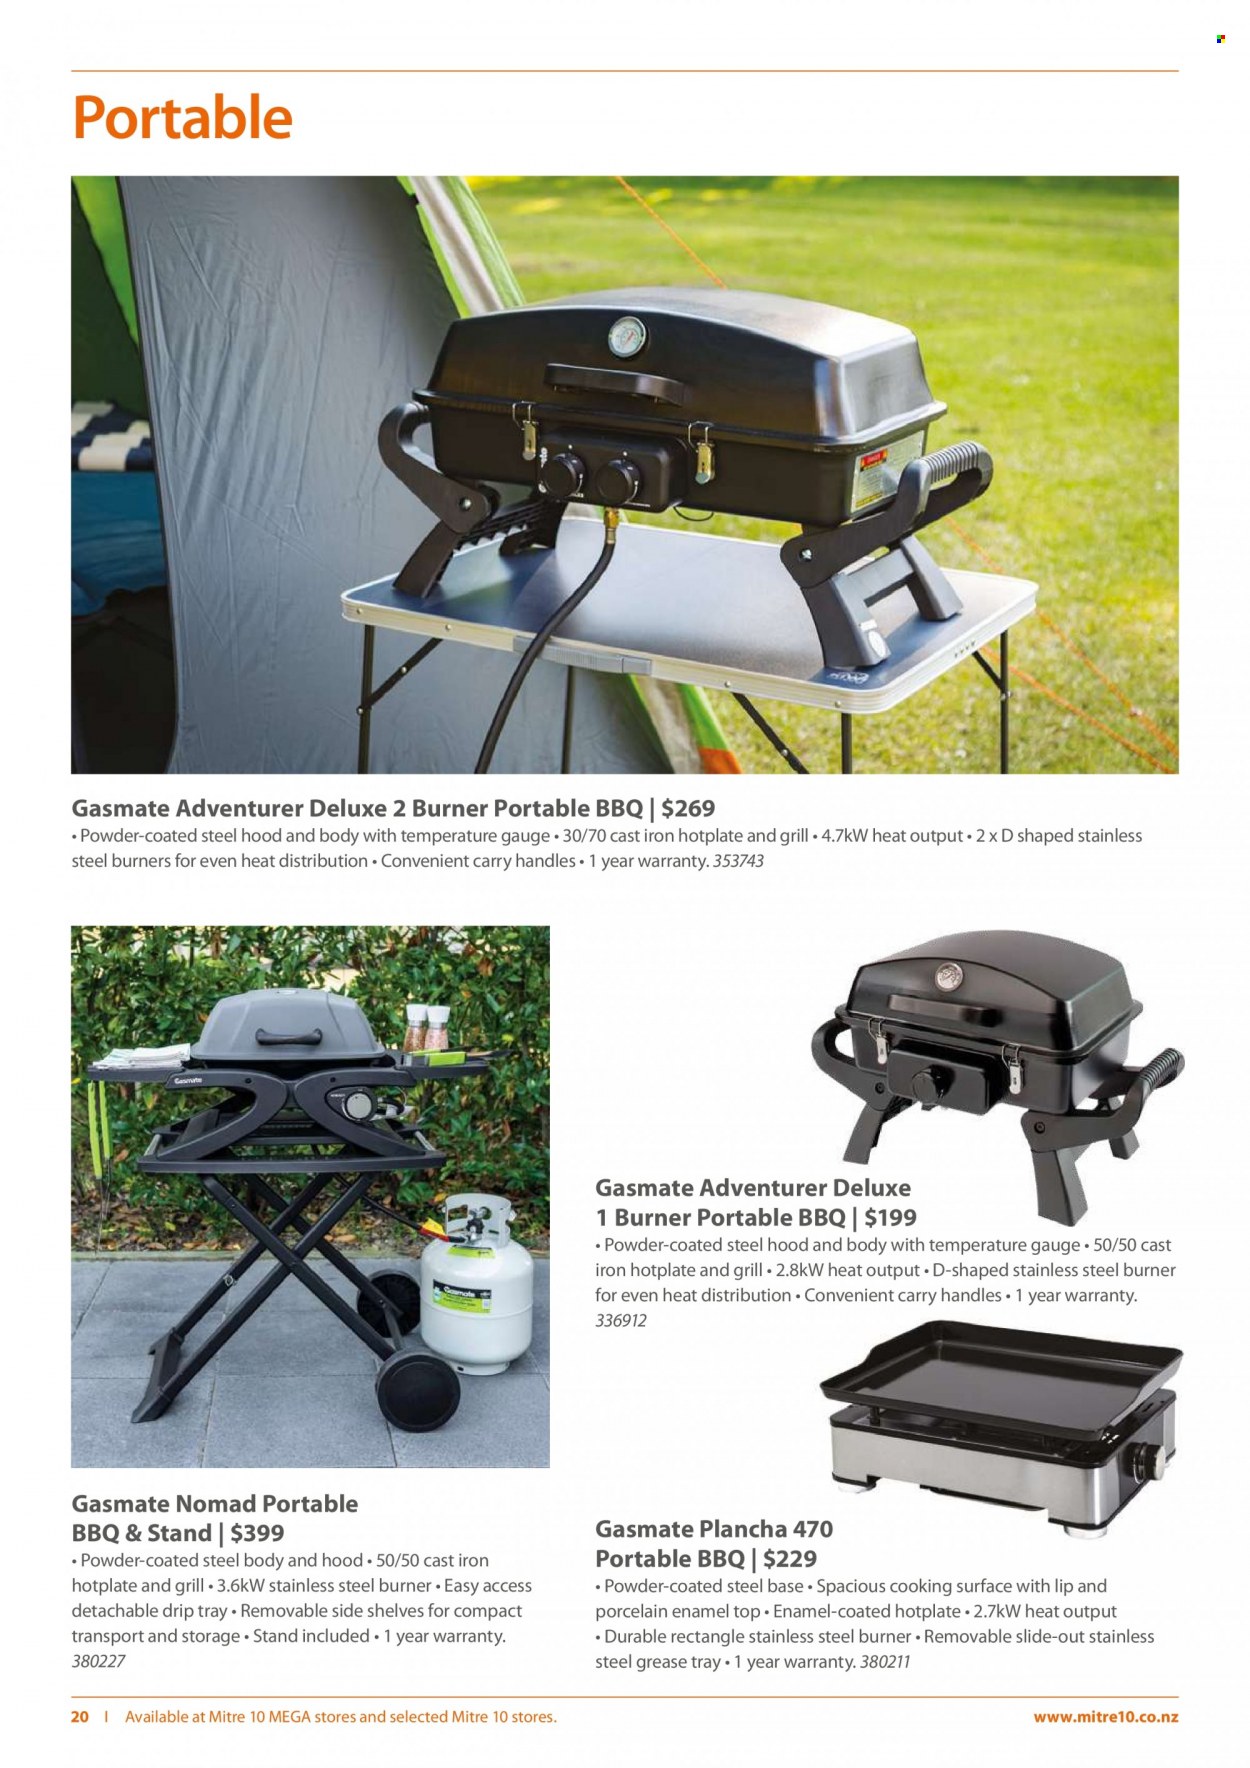 Mitre 10 mailer . Page 20.